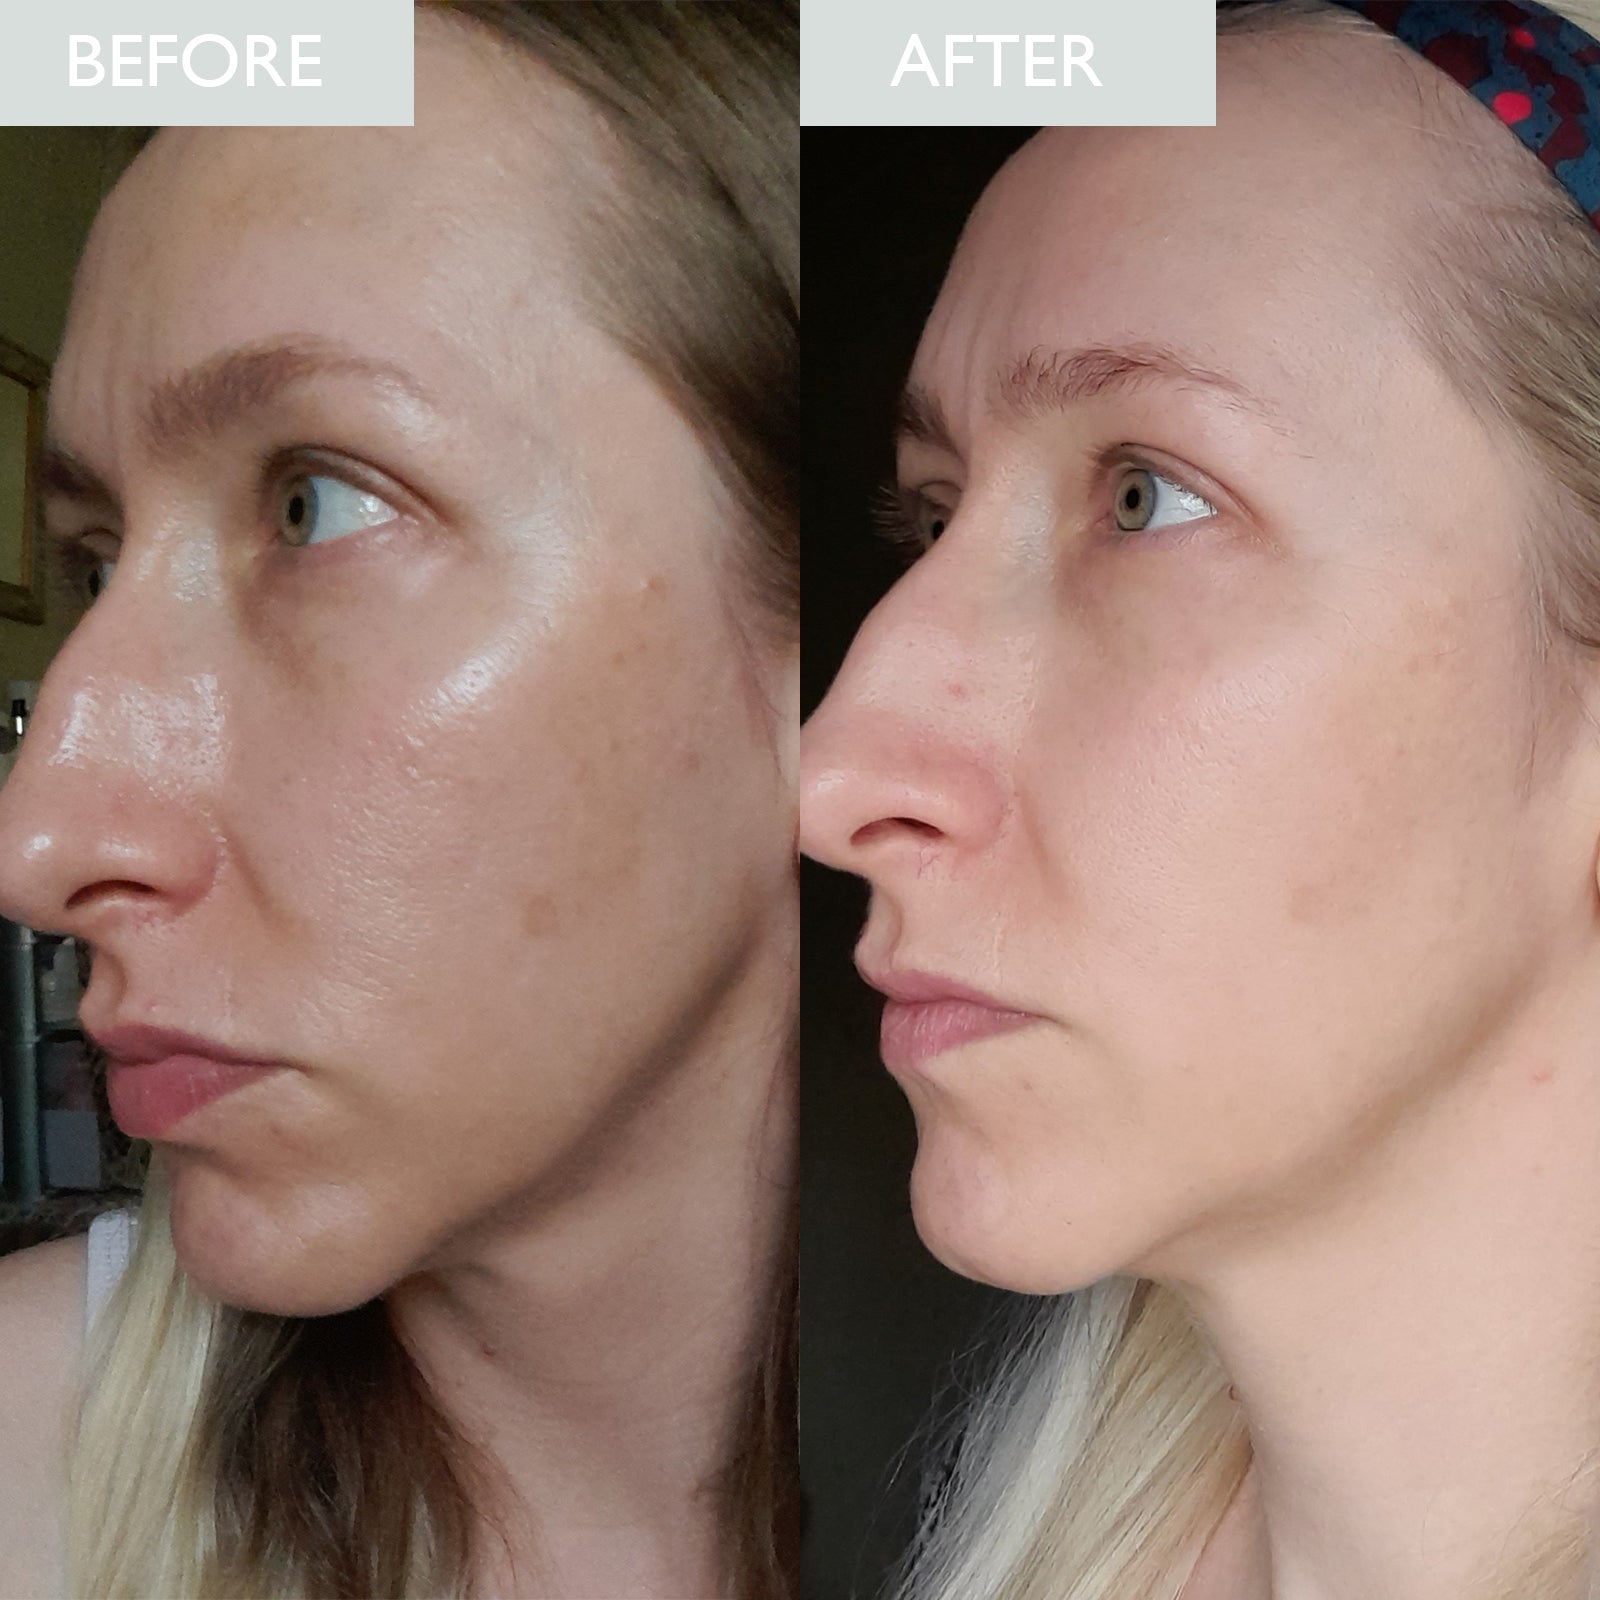 Results showing of an improvement in oily skin after using the purifying cleansing gel.